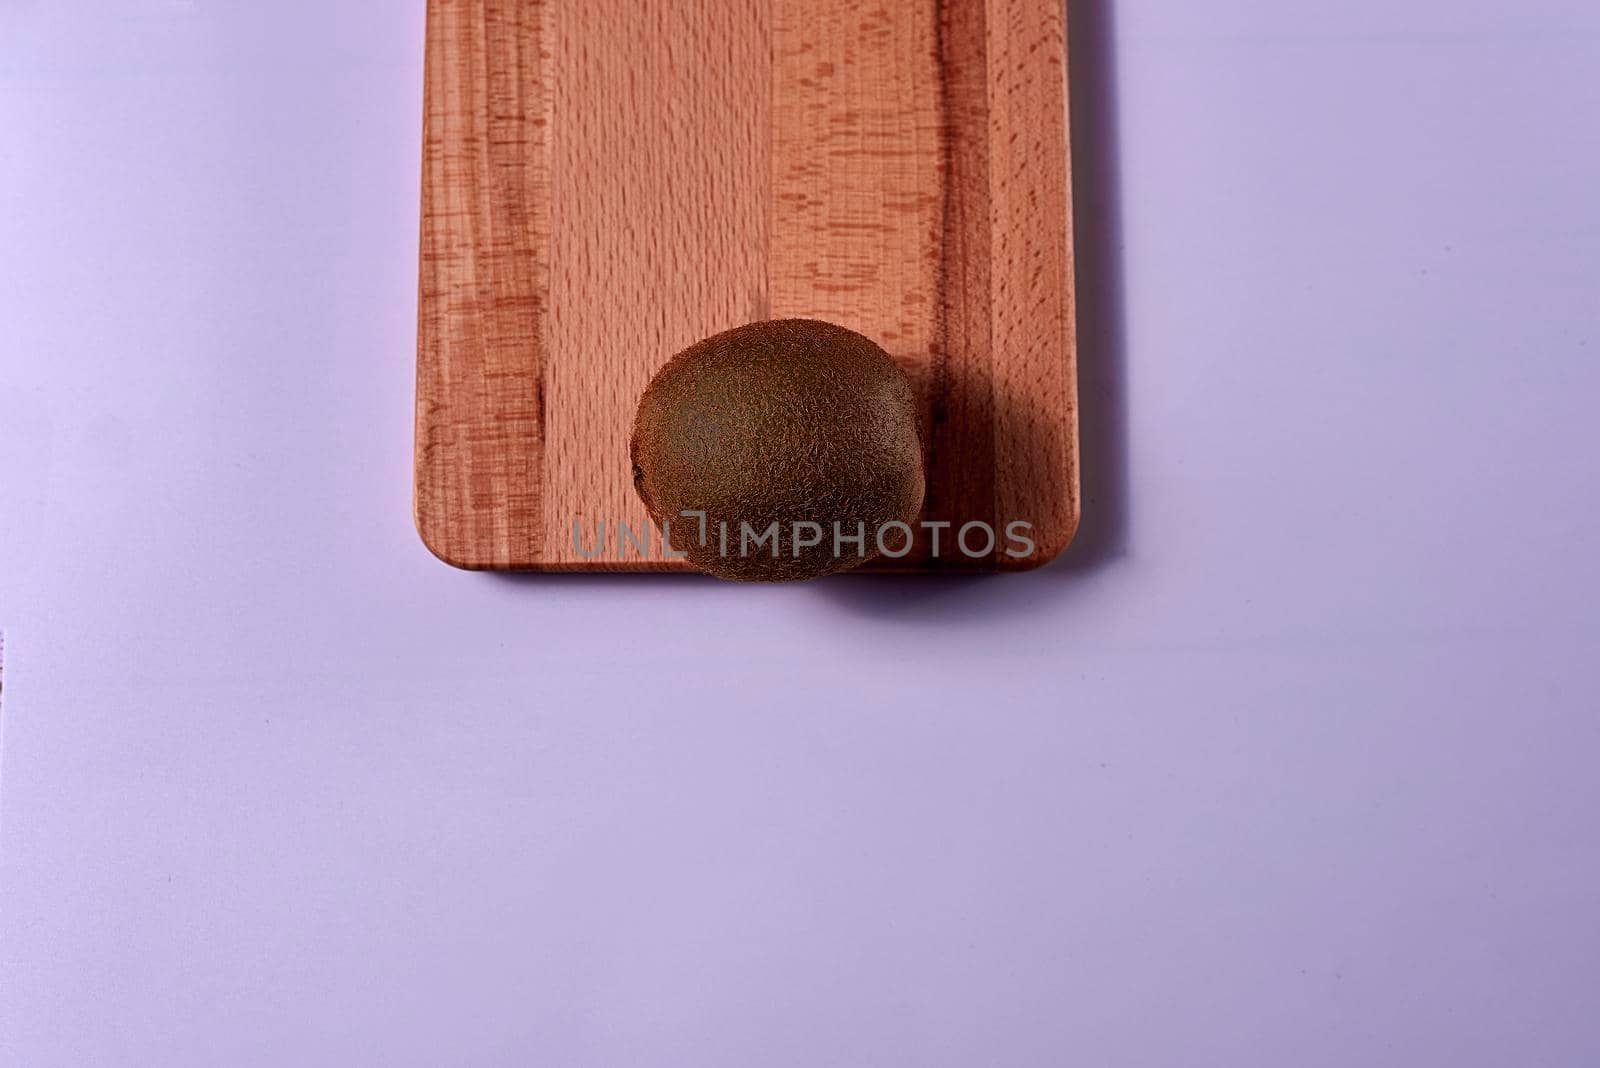 Kiwi on wooden board. Blue background, unique, free space, zenithal view